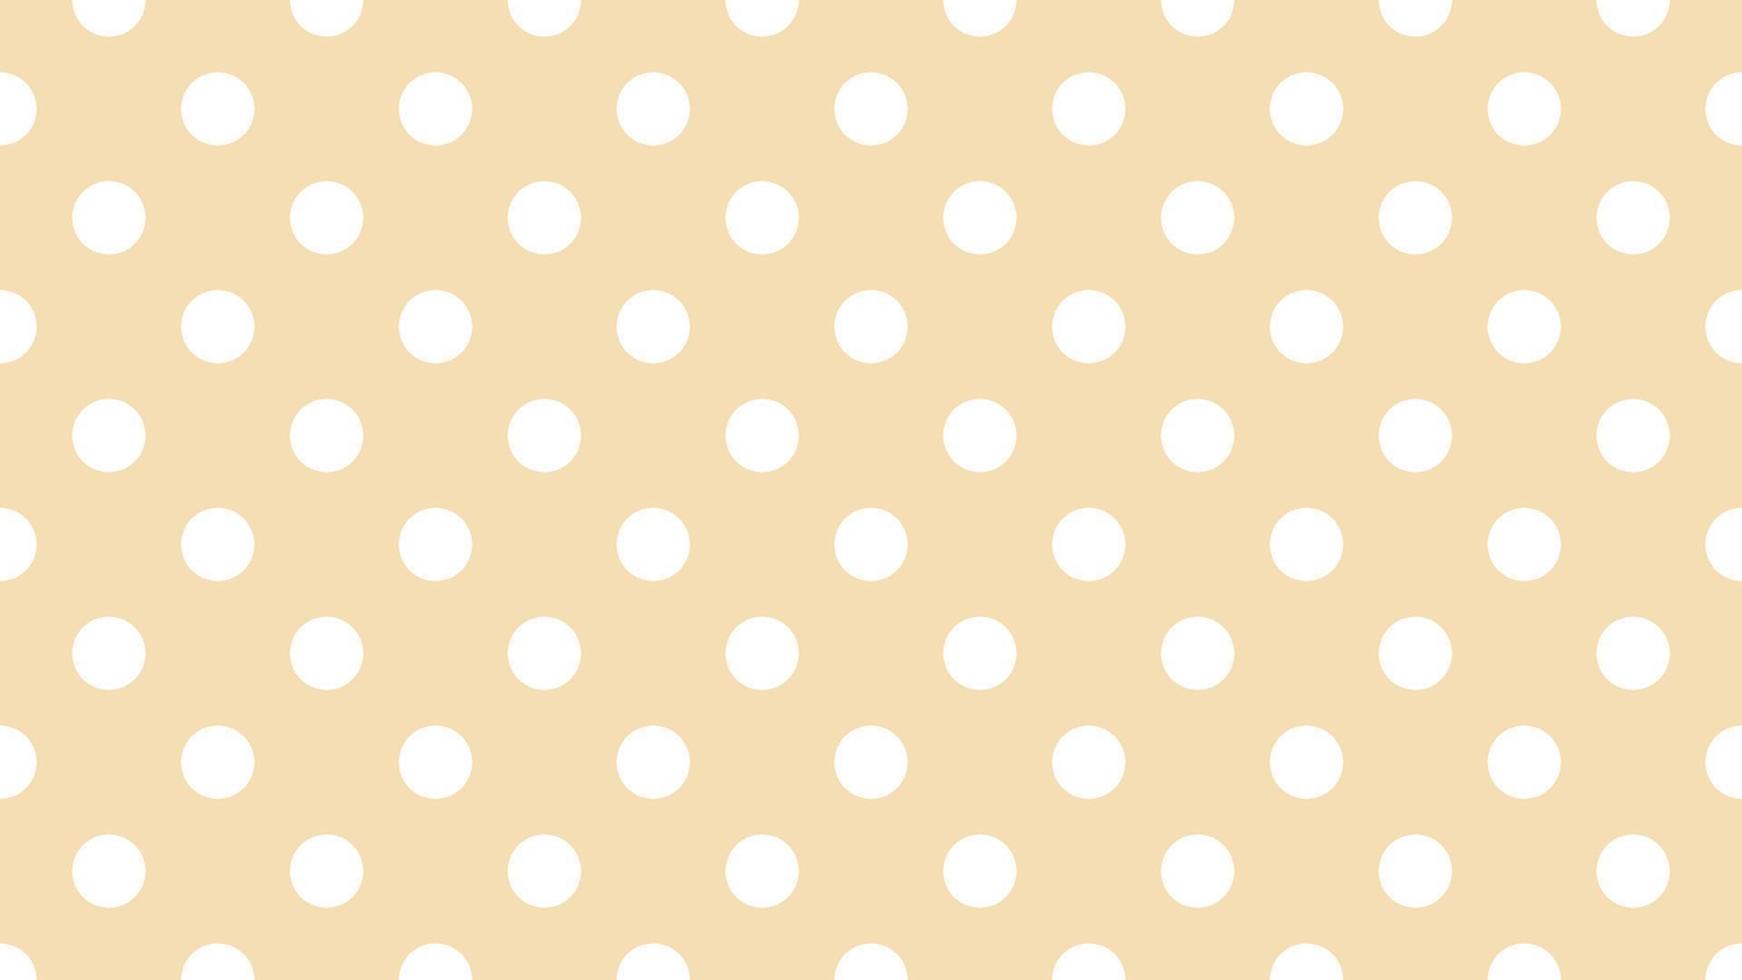 white color polka dots over wheat brown background vector